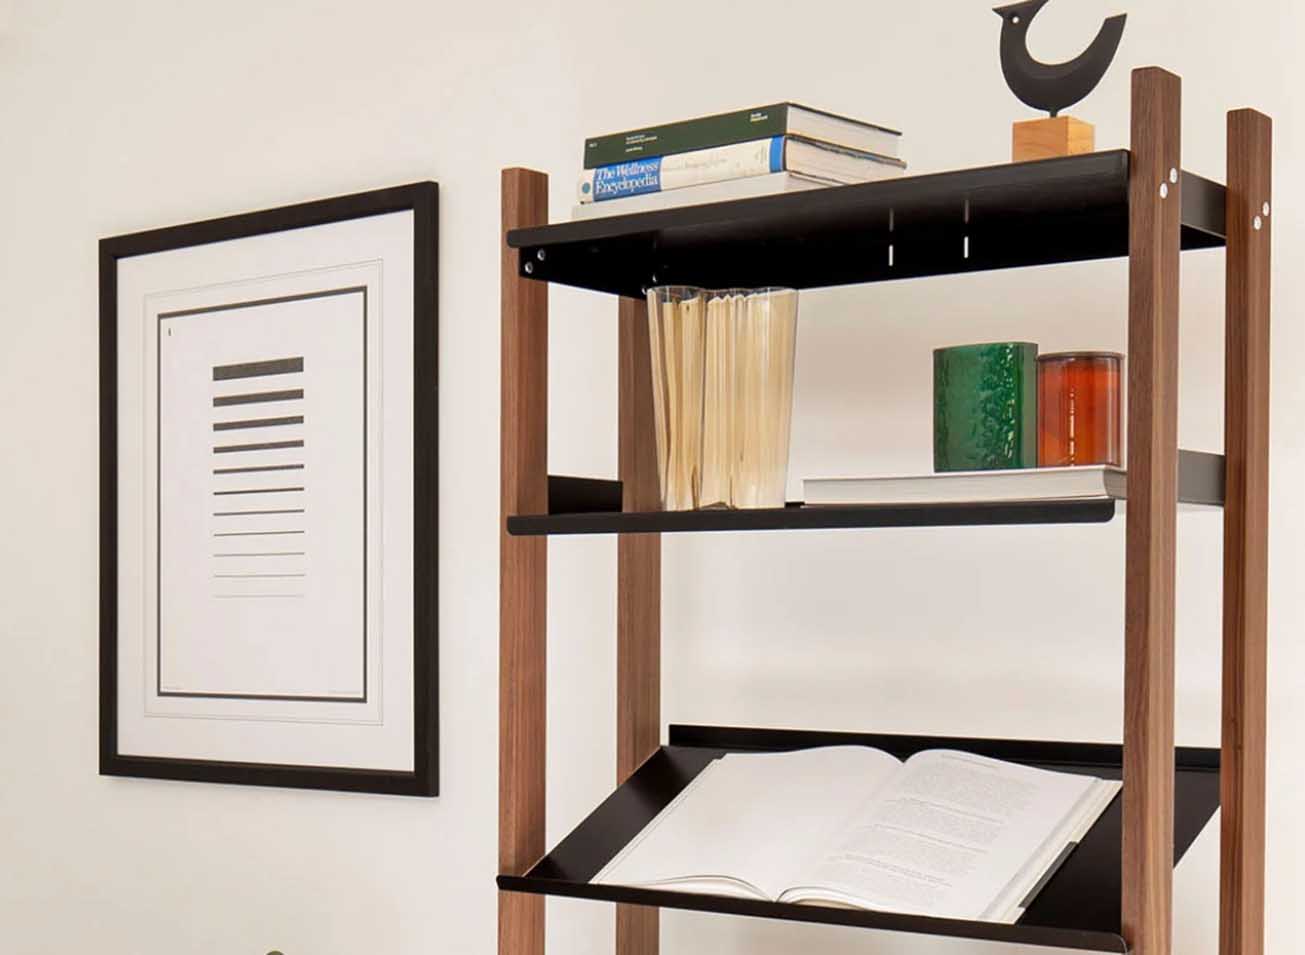 Shelving Selection: The Fusion of Flexibility, Practicality, and Artistry